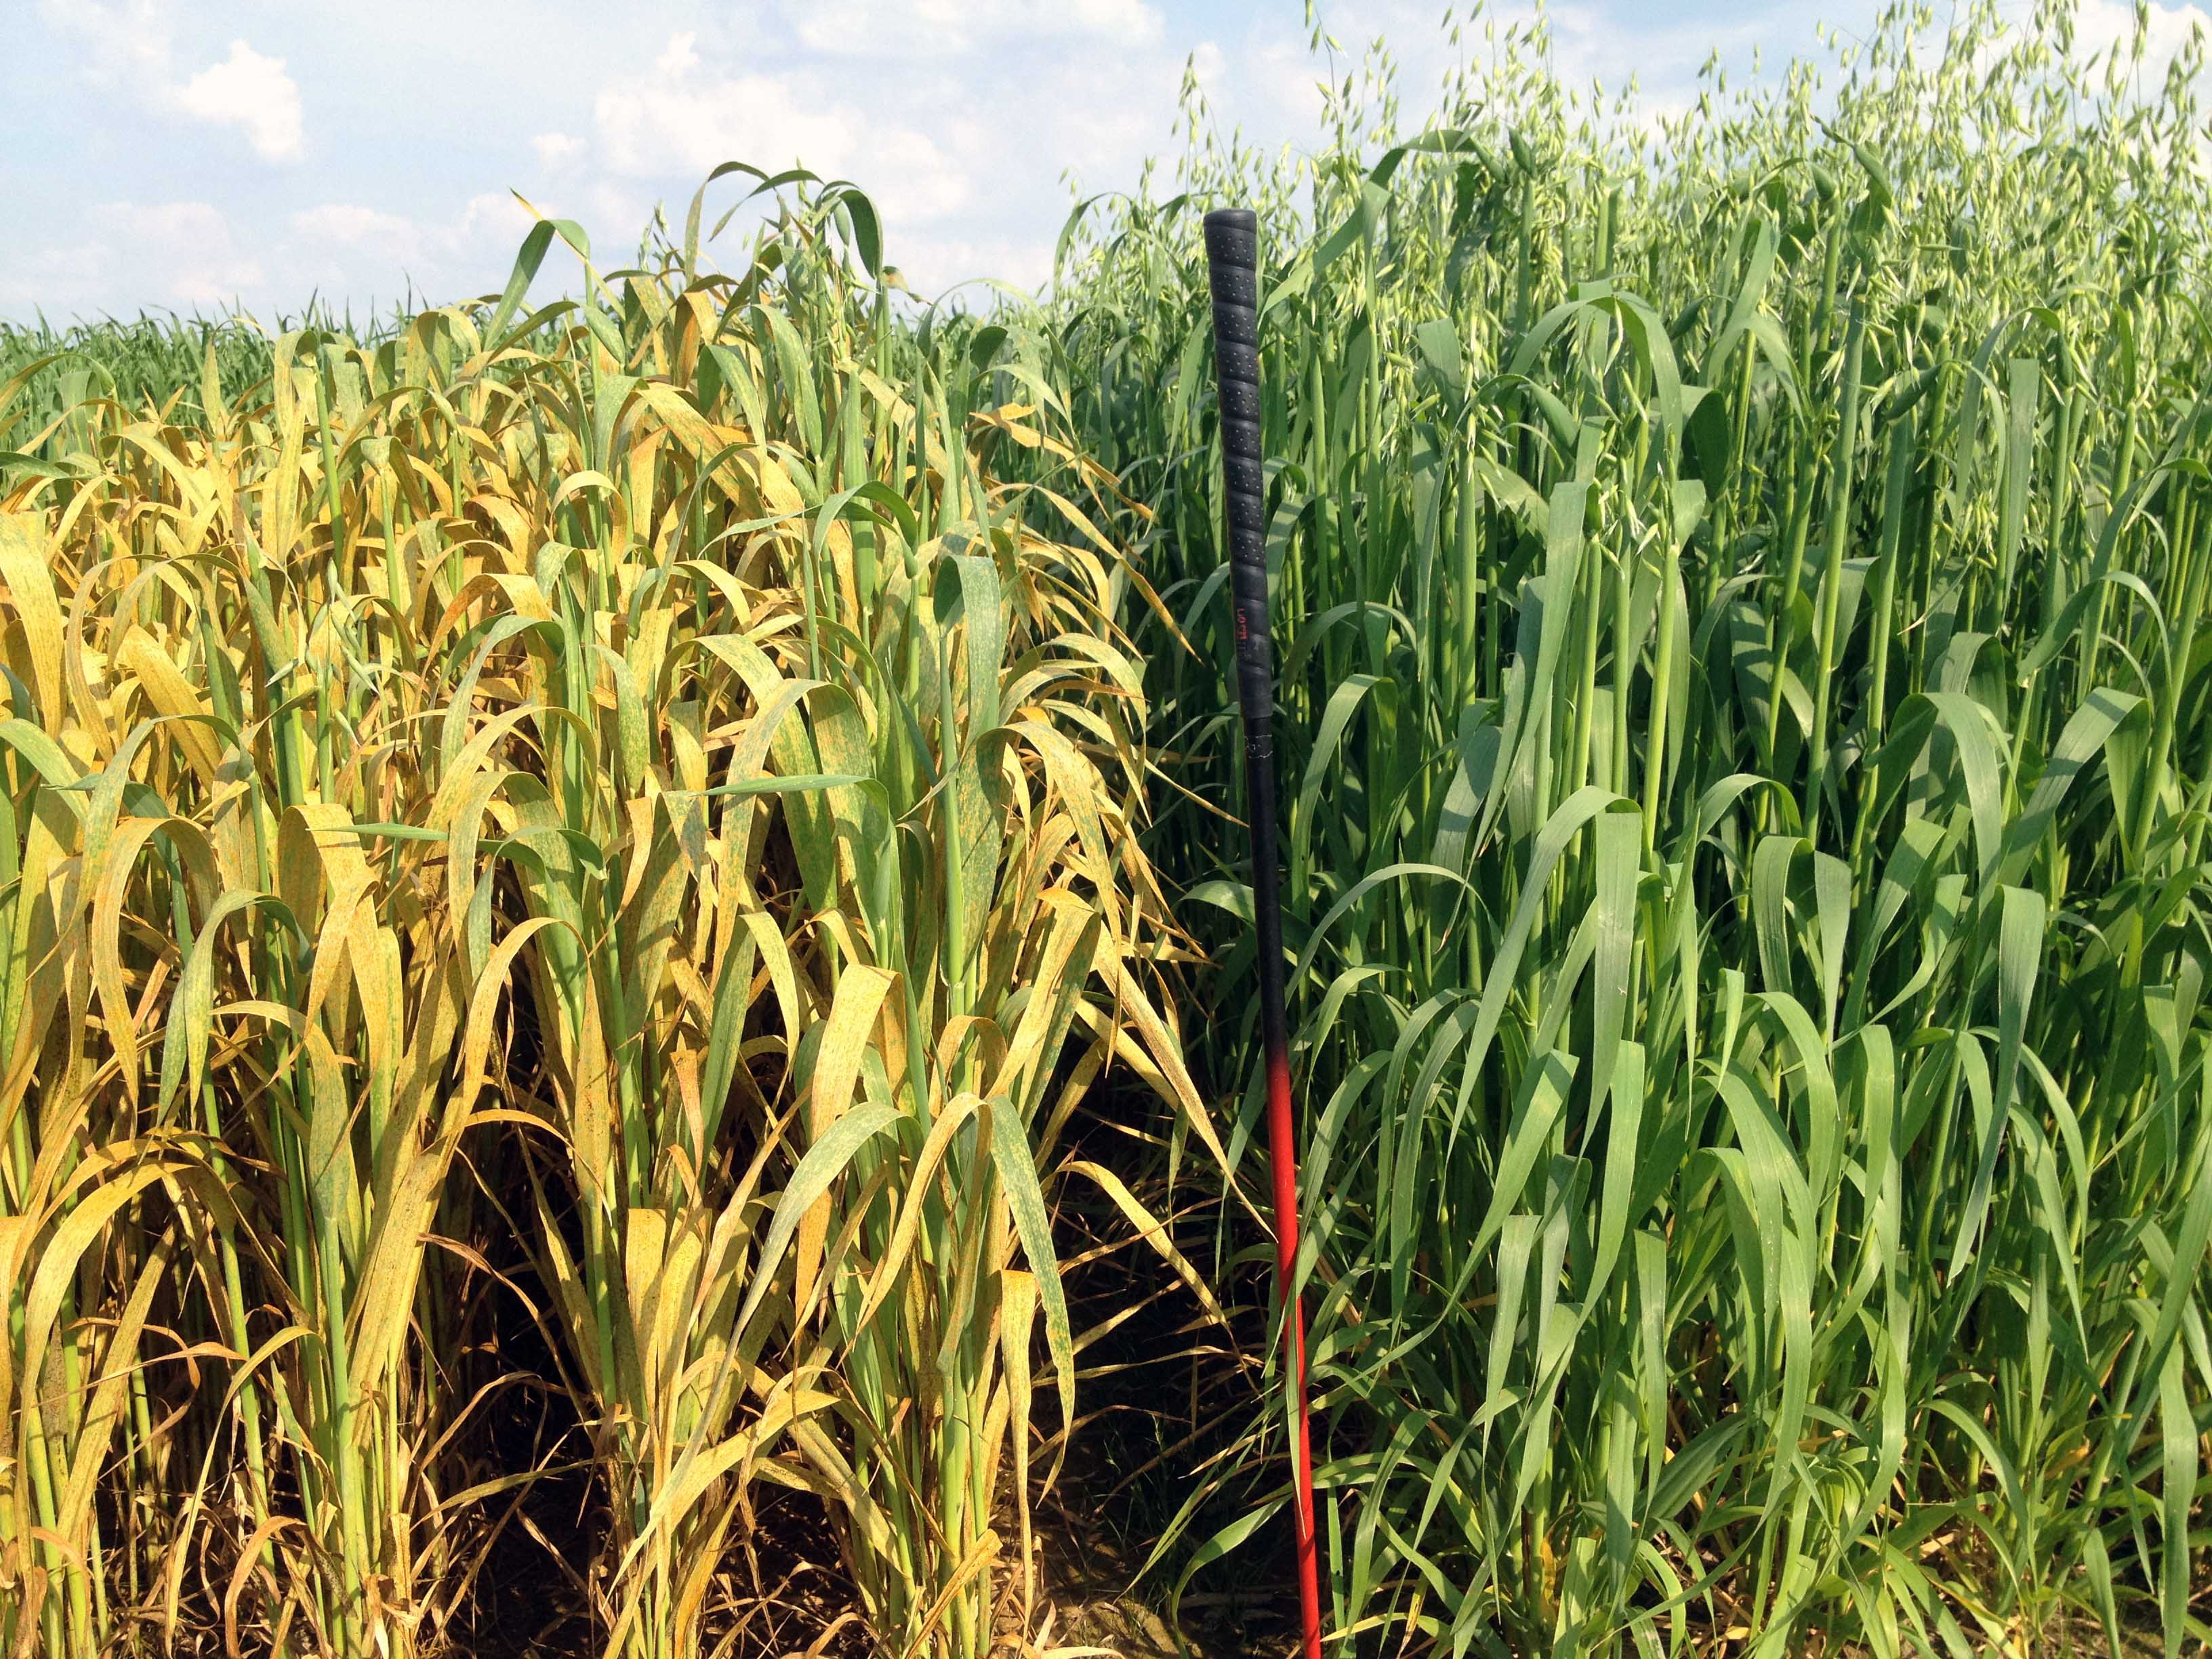 Two oat plots with contrasting amounts of crown rust damage. Details in text following the image.